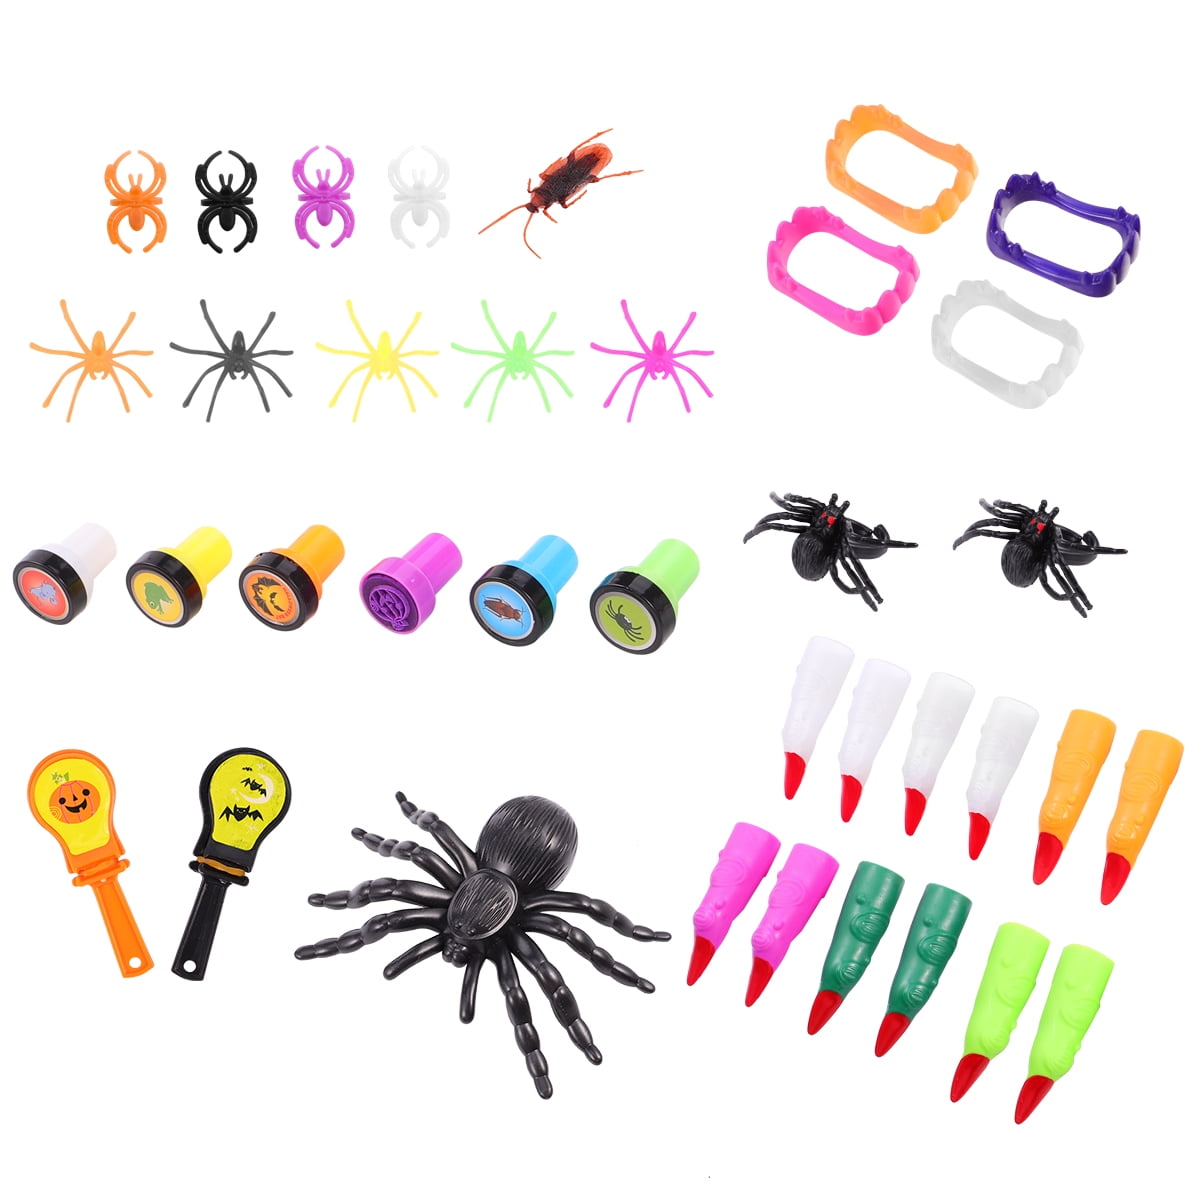 2PC Realistic Fake Spider Toys Insect Model Halloween Joke Prank Props Scary Toy 